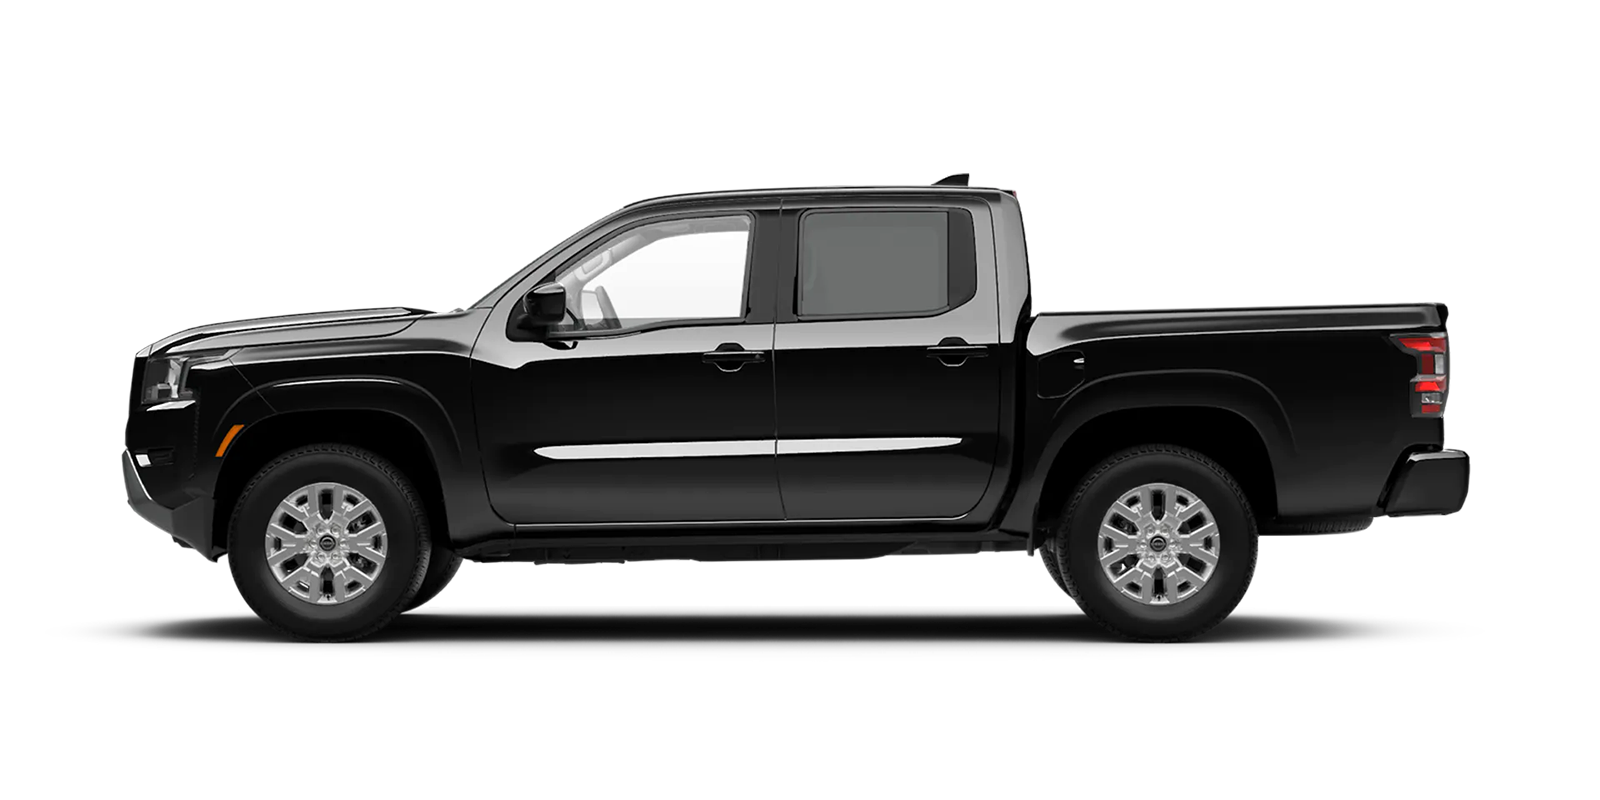 2022 Frontier Crew Cab SV 4x2 in Super Black | Nissan of Pittsfield in Pittsfield MA